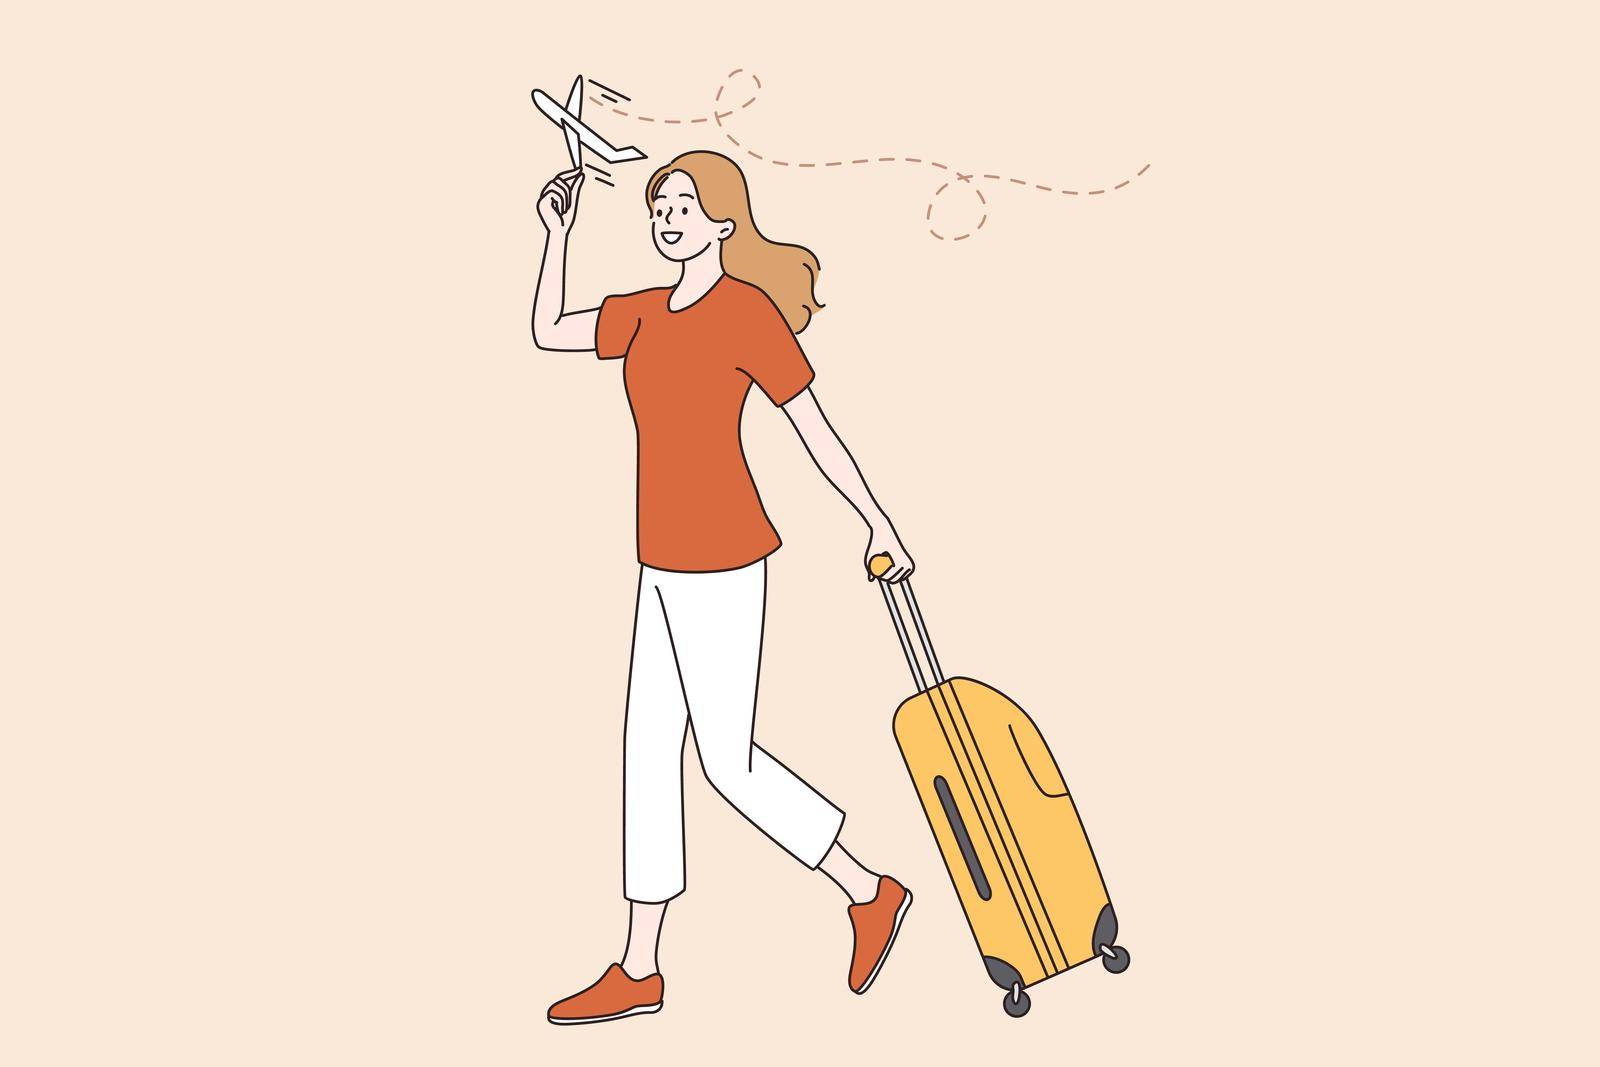 Traveling and vacations during covid-19 pandemic concept. Young woman walking with suitcase ready for flight during quarantine vector illustration